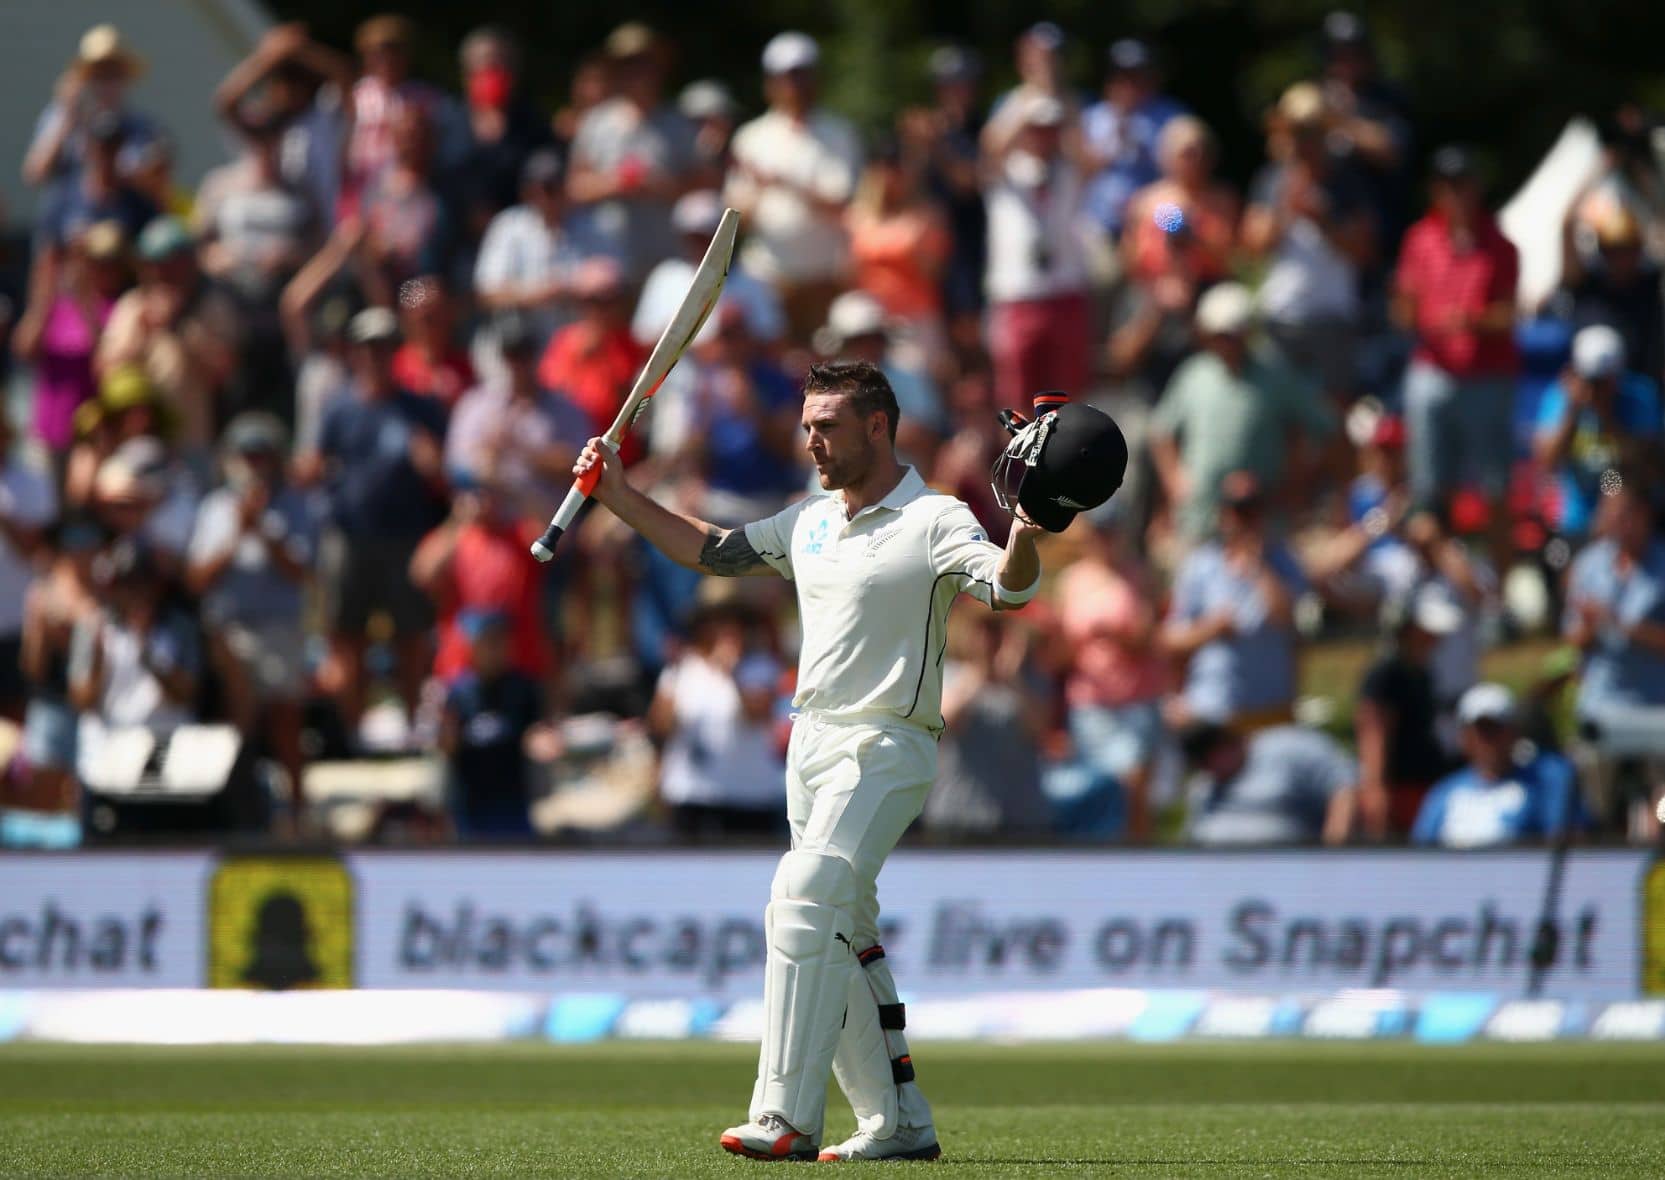 OTD in #2016, Brendon McCullum went out in a blaze of glory with record-breaking century in last Test 